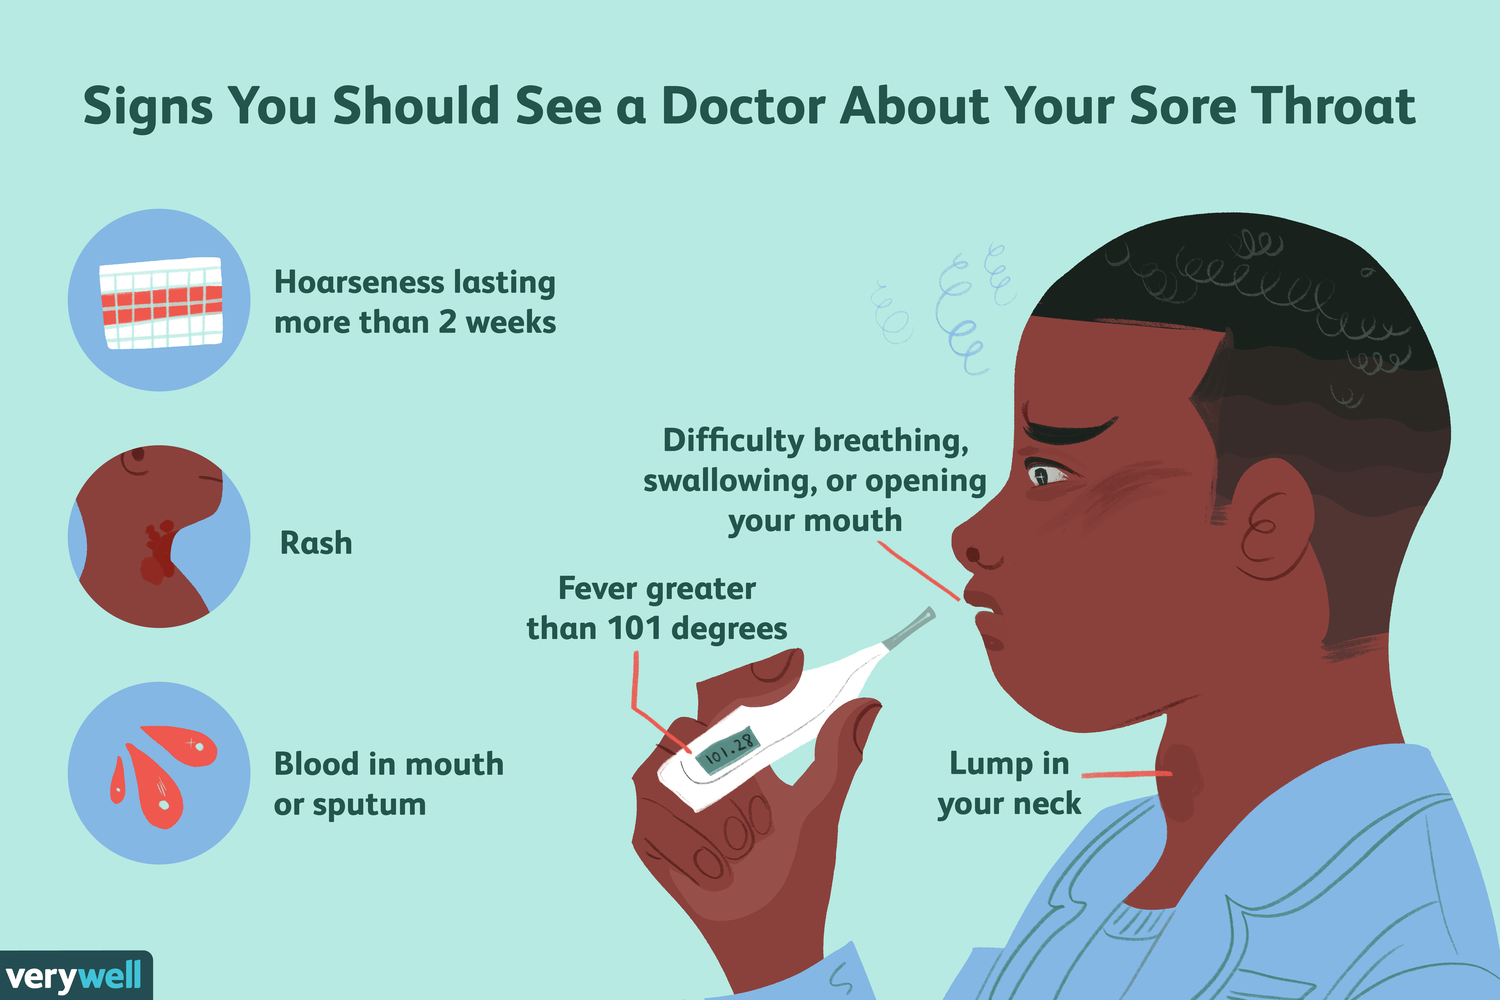 When to Seek Medical Attention for Sore Throat?